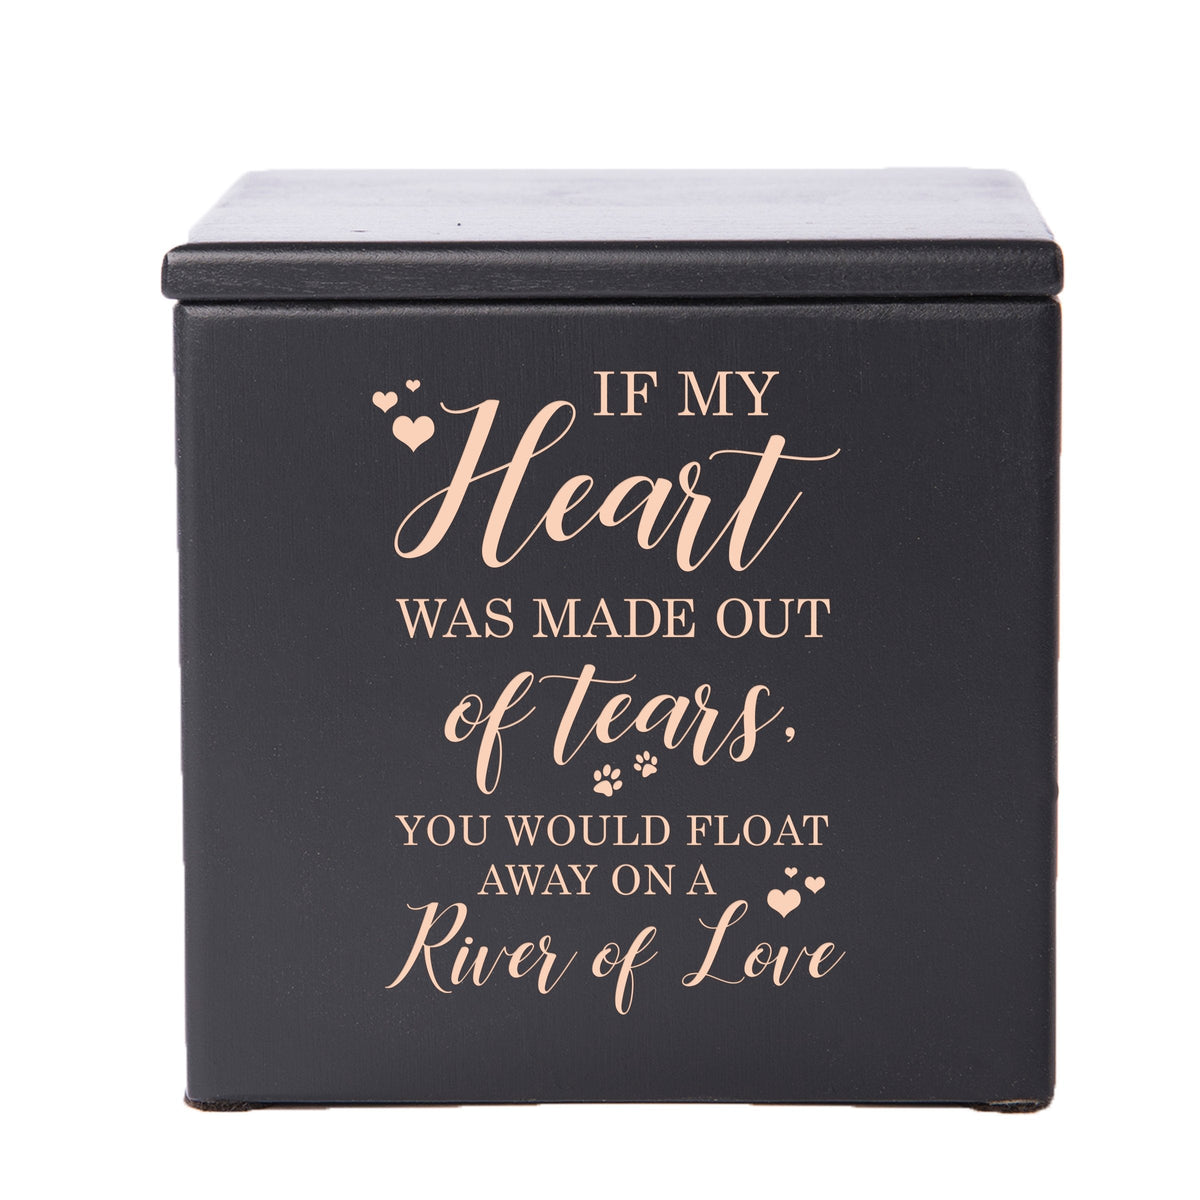 Black Pet Memorial 3.5x3.5 Keepsake Urn with phrase &quot;If My Heart Was Made Out of Tears&quot;